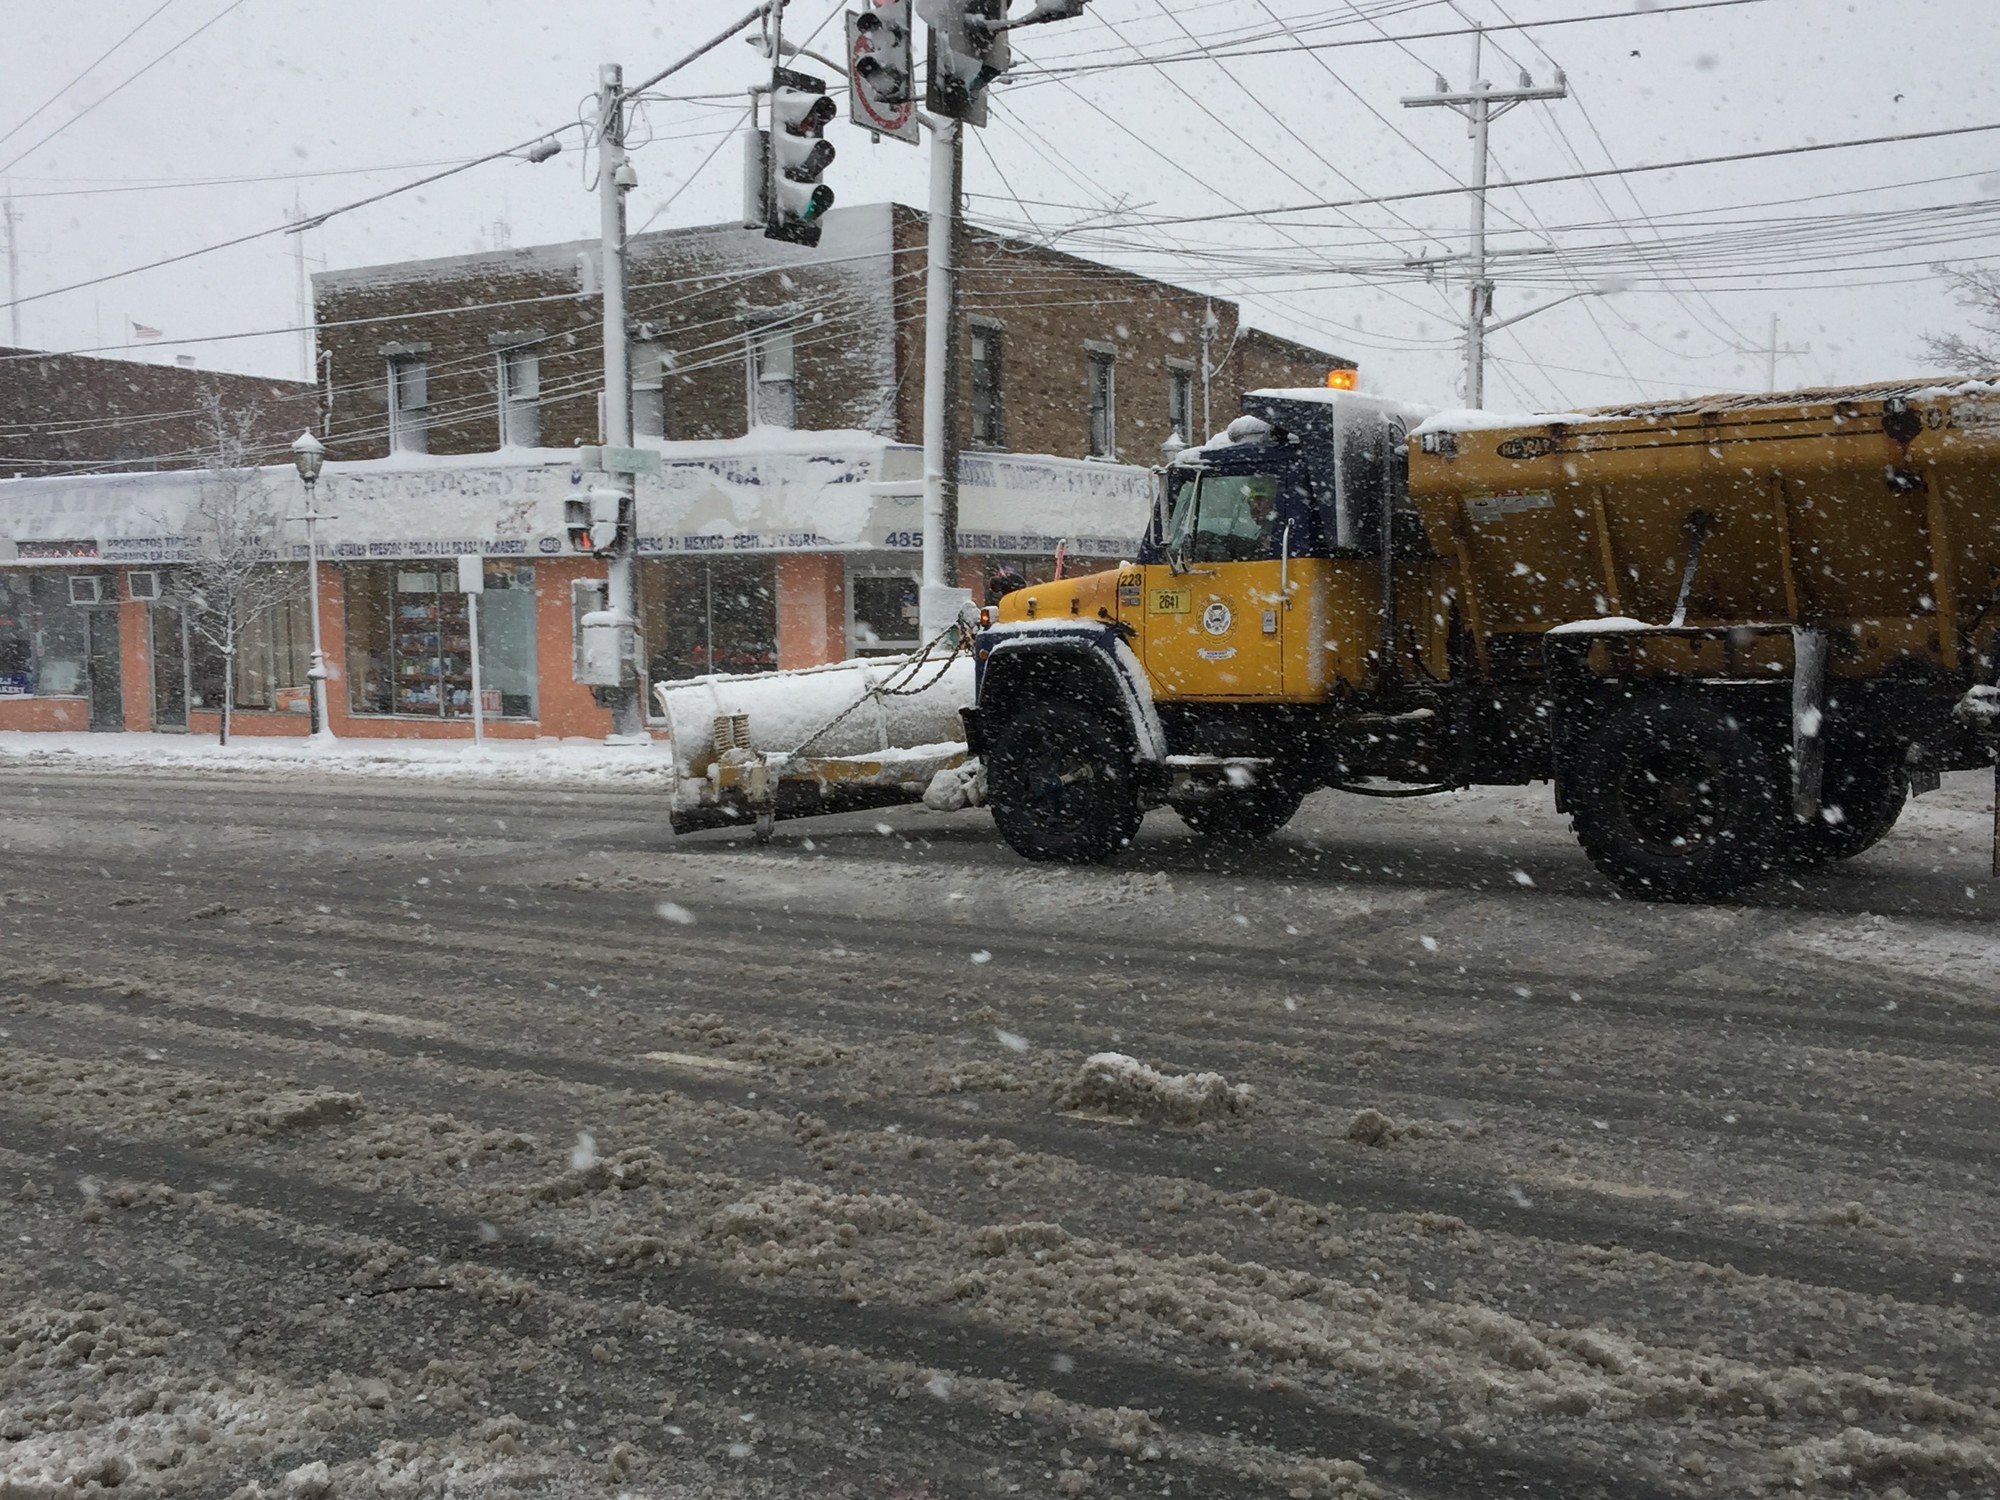 The Town of Hempstead has been plowing roads since early this morning.